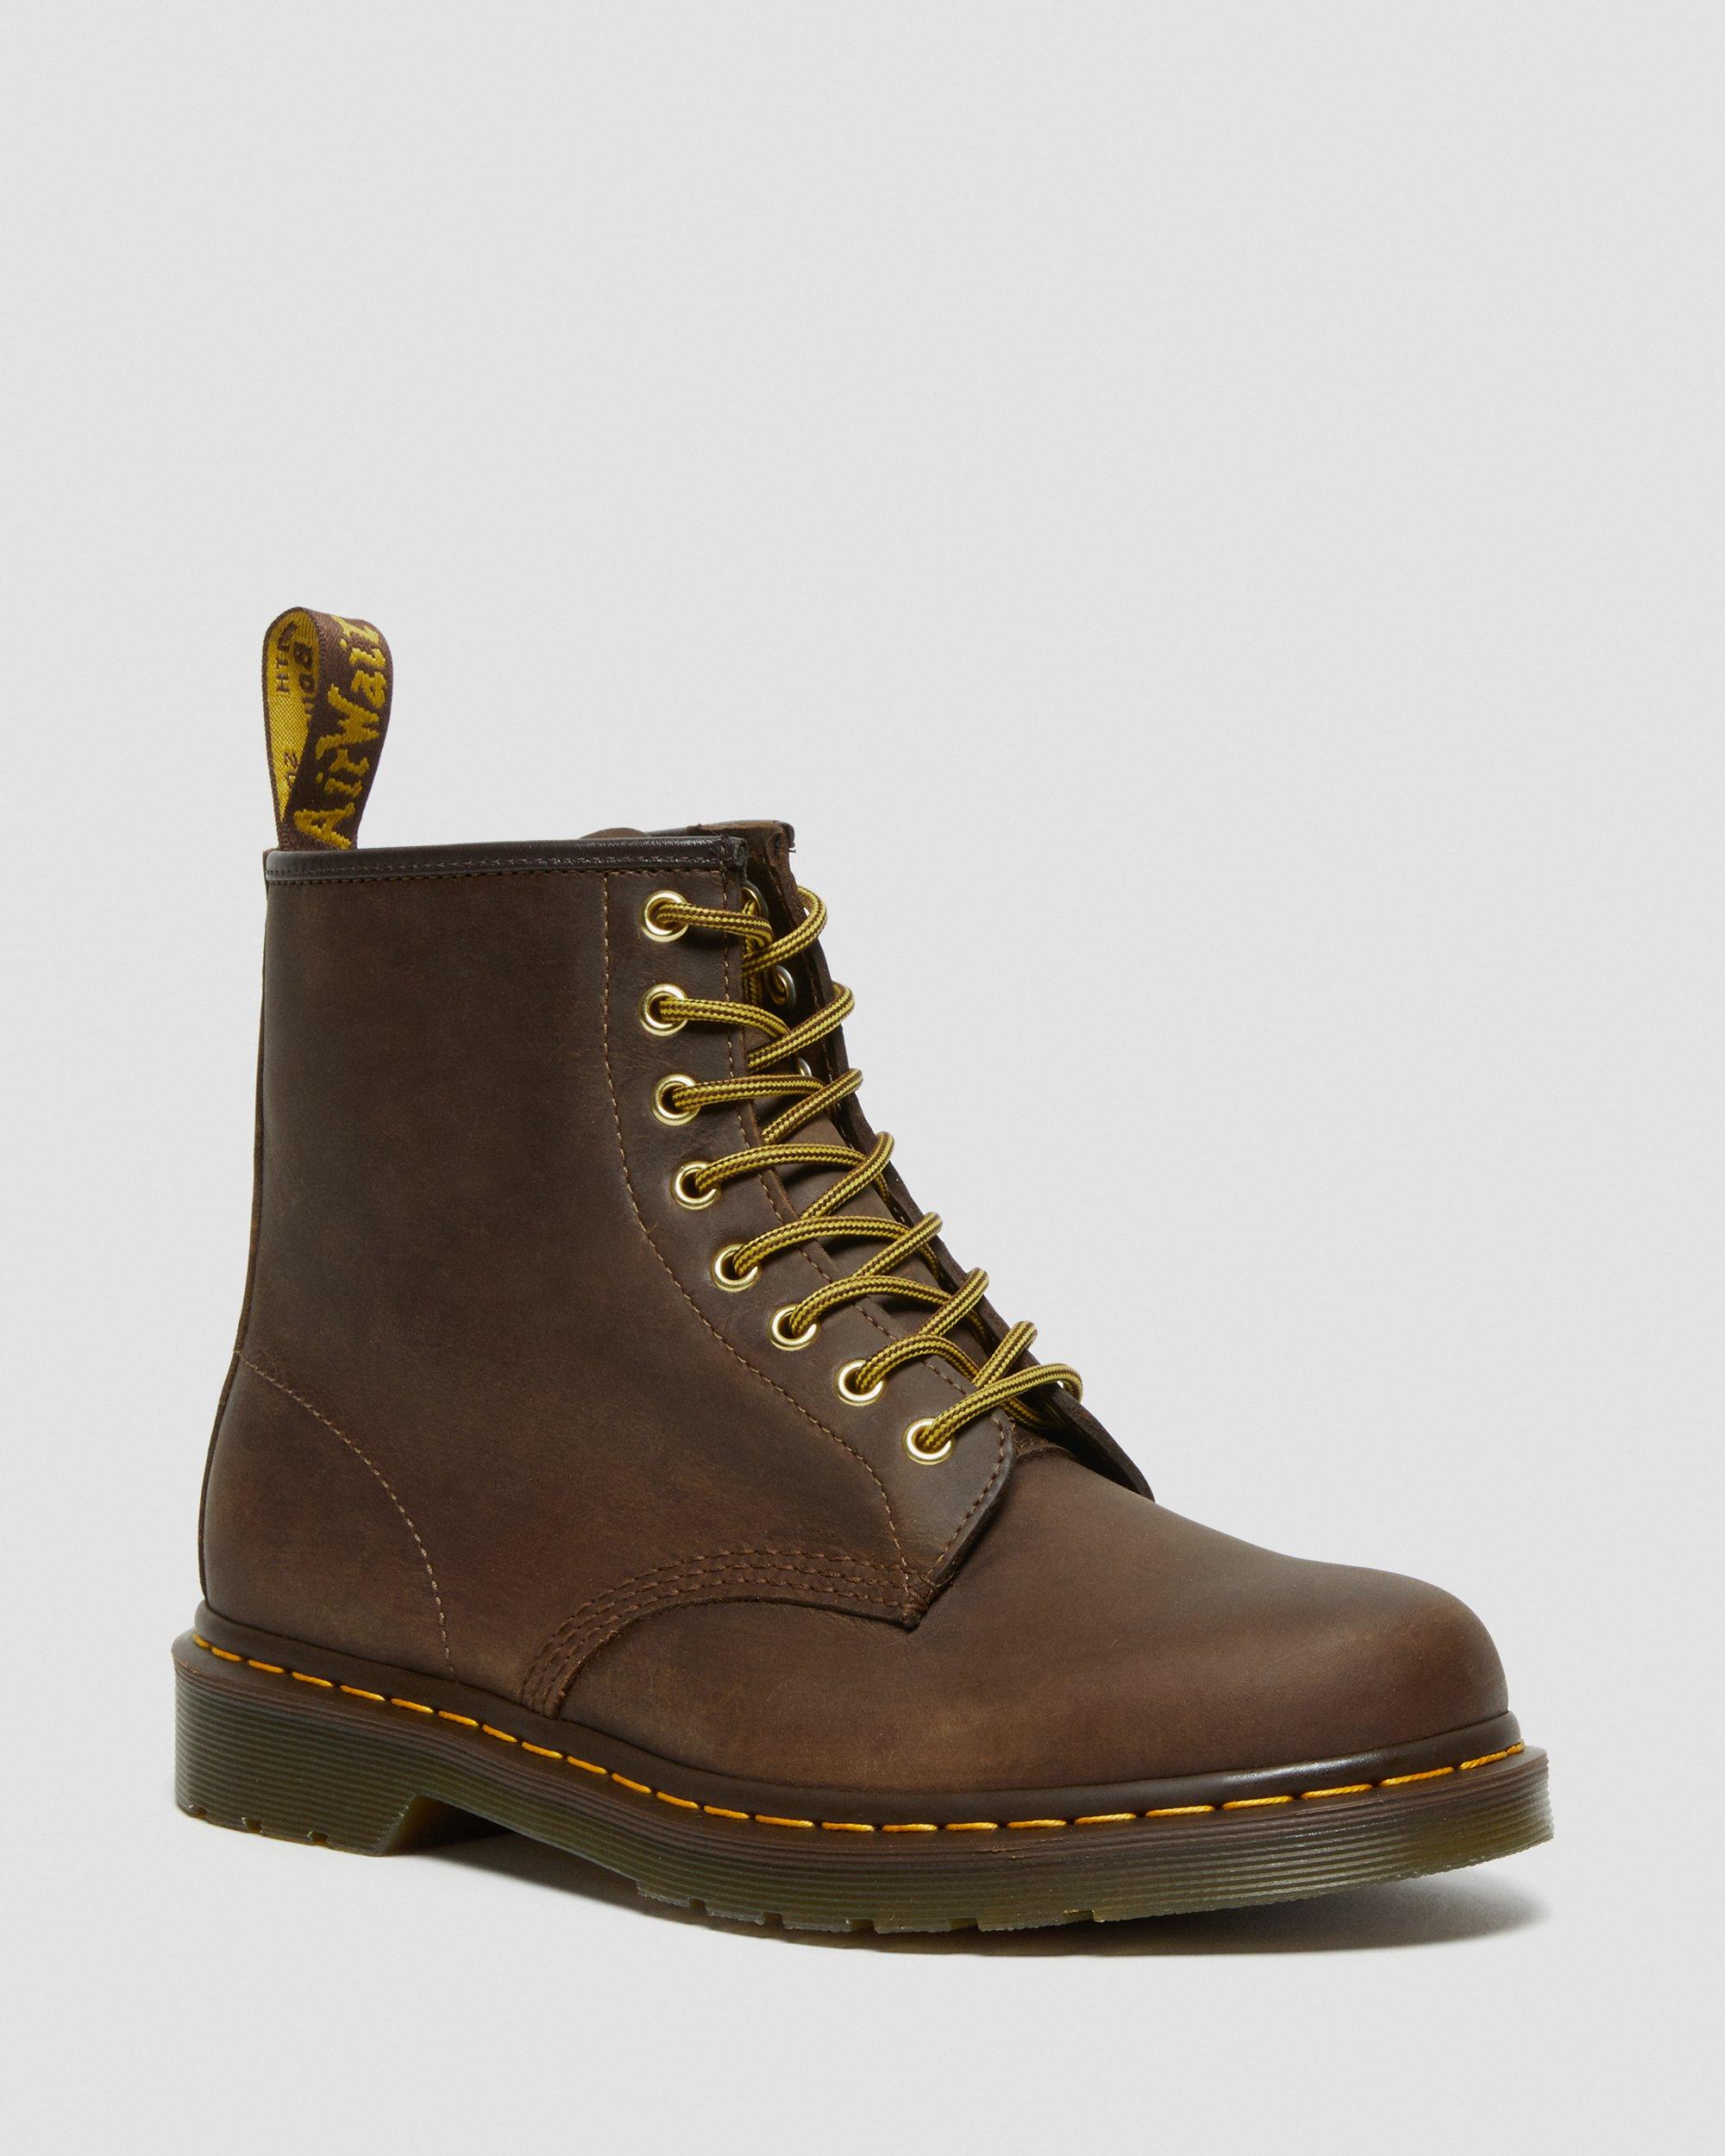 DR MARTENS 1460 Crazy Horse Leather Lace Up Mens Boots - BROWN